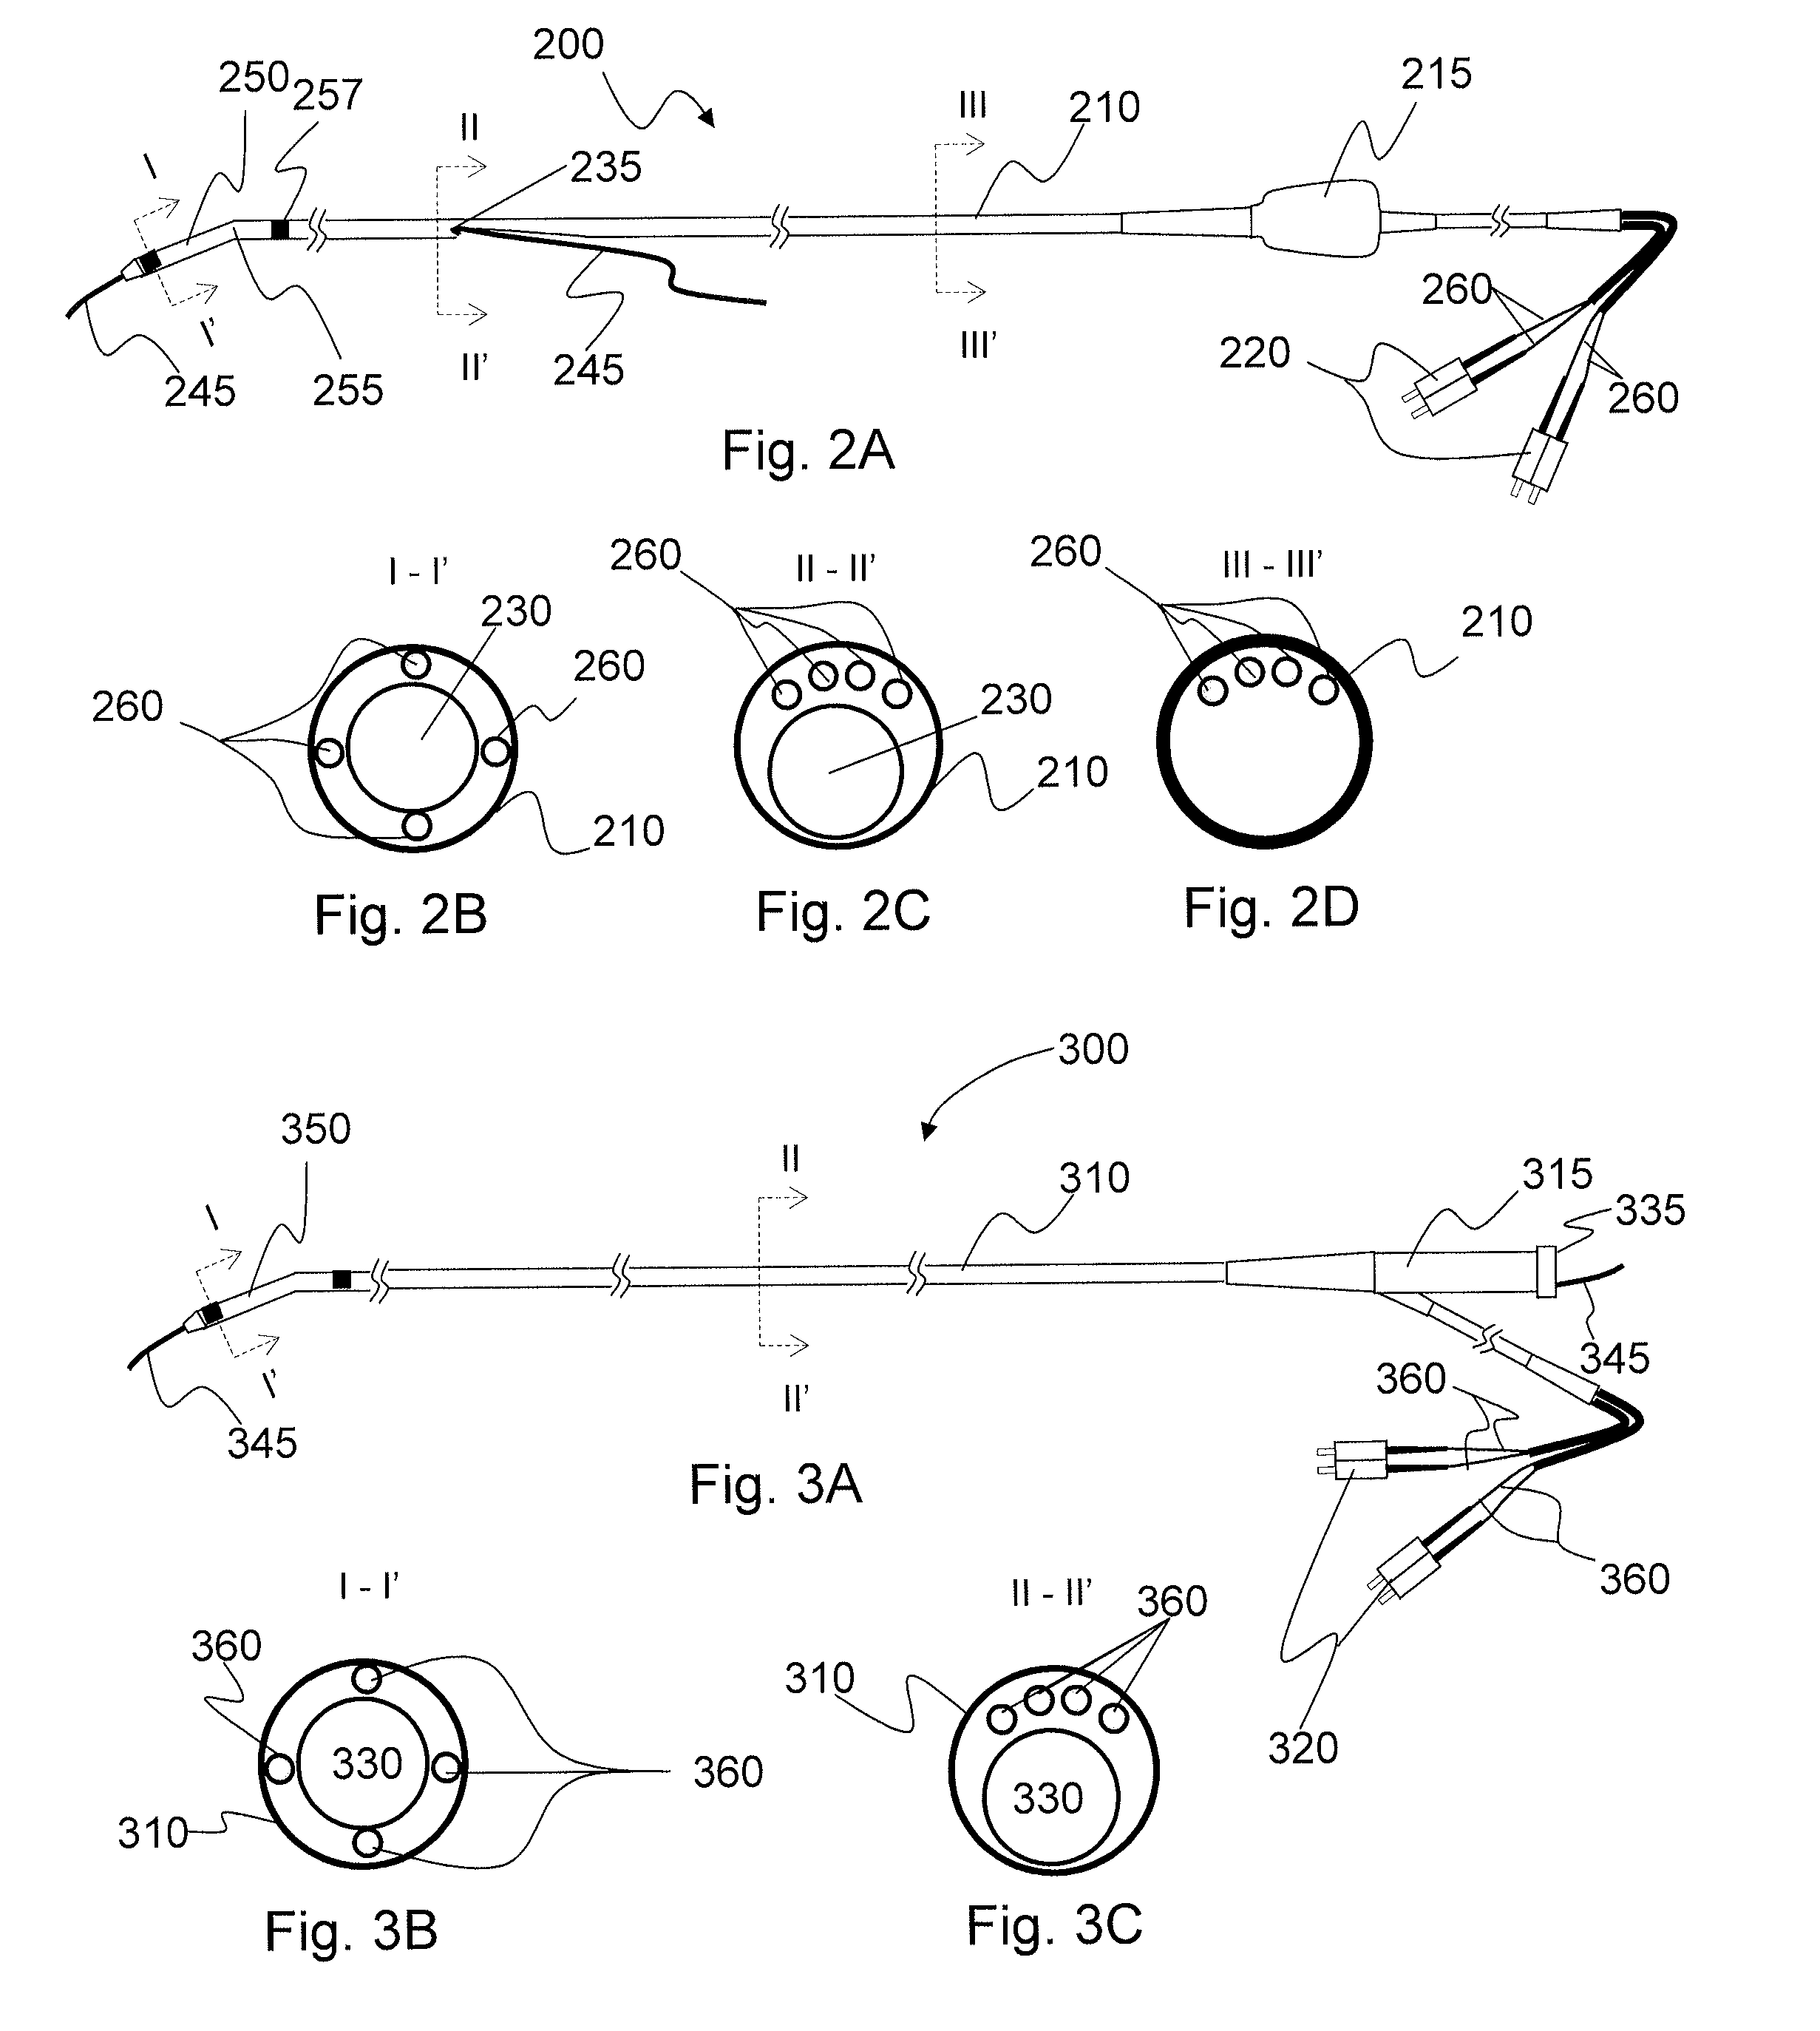 Systems and methods for analysis and treatment of an occluded body lumen